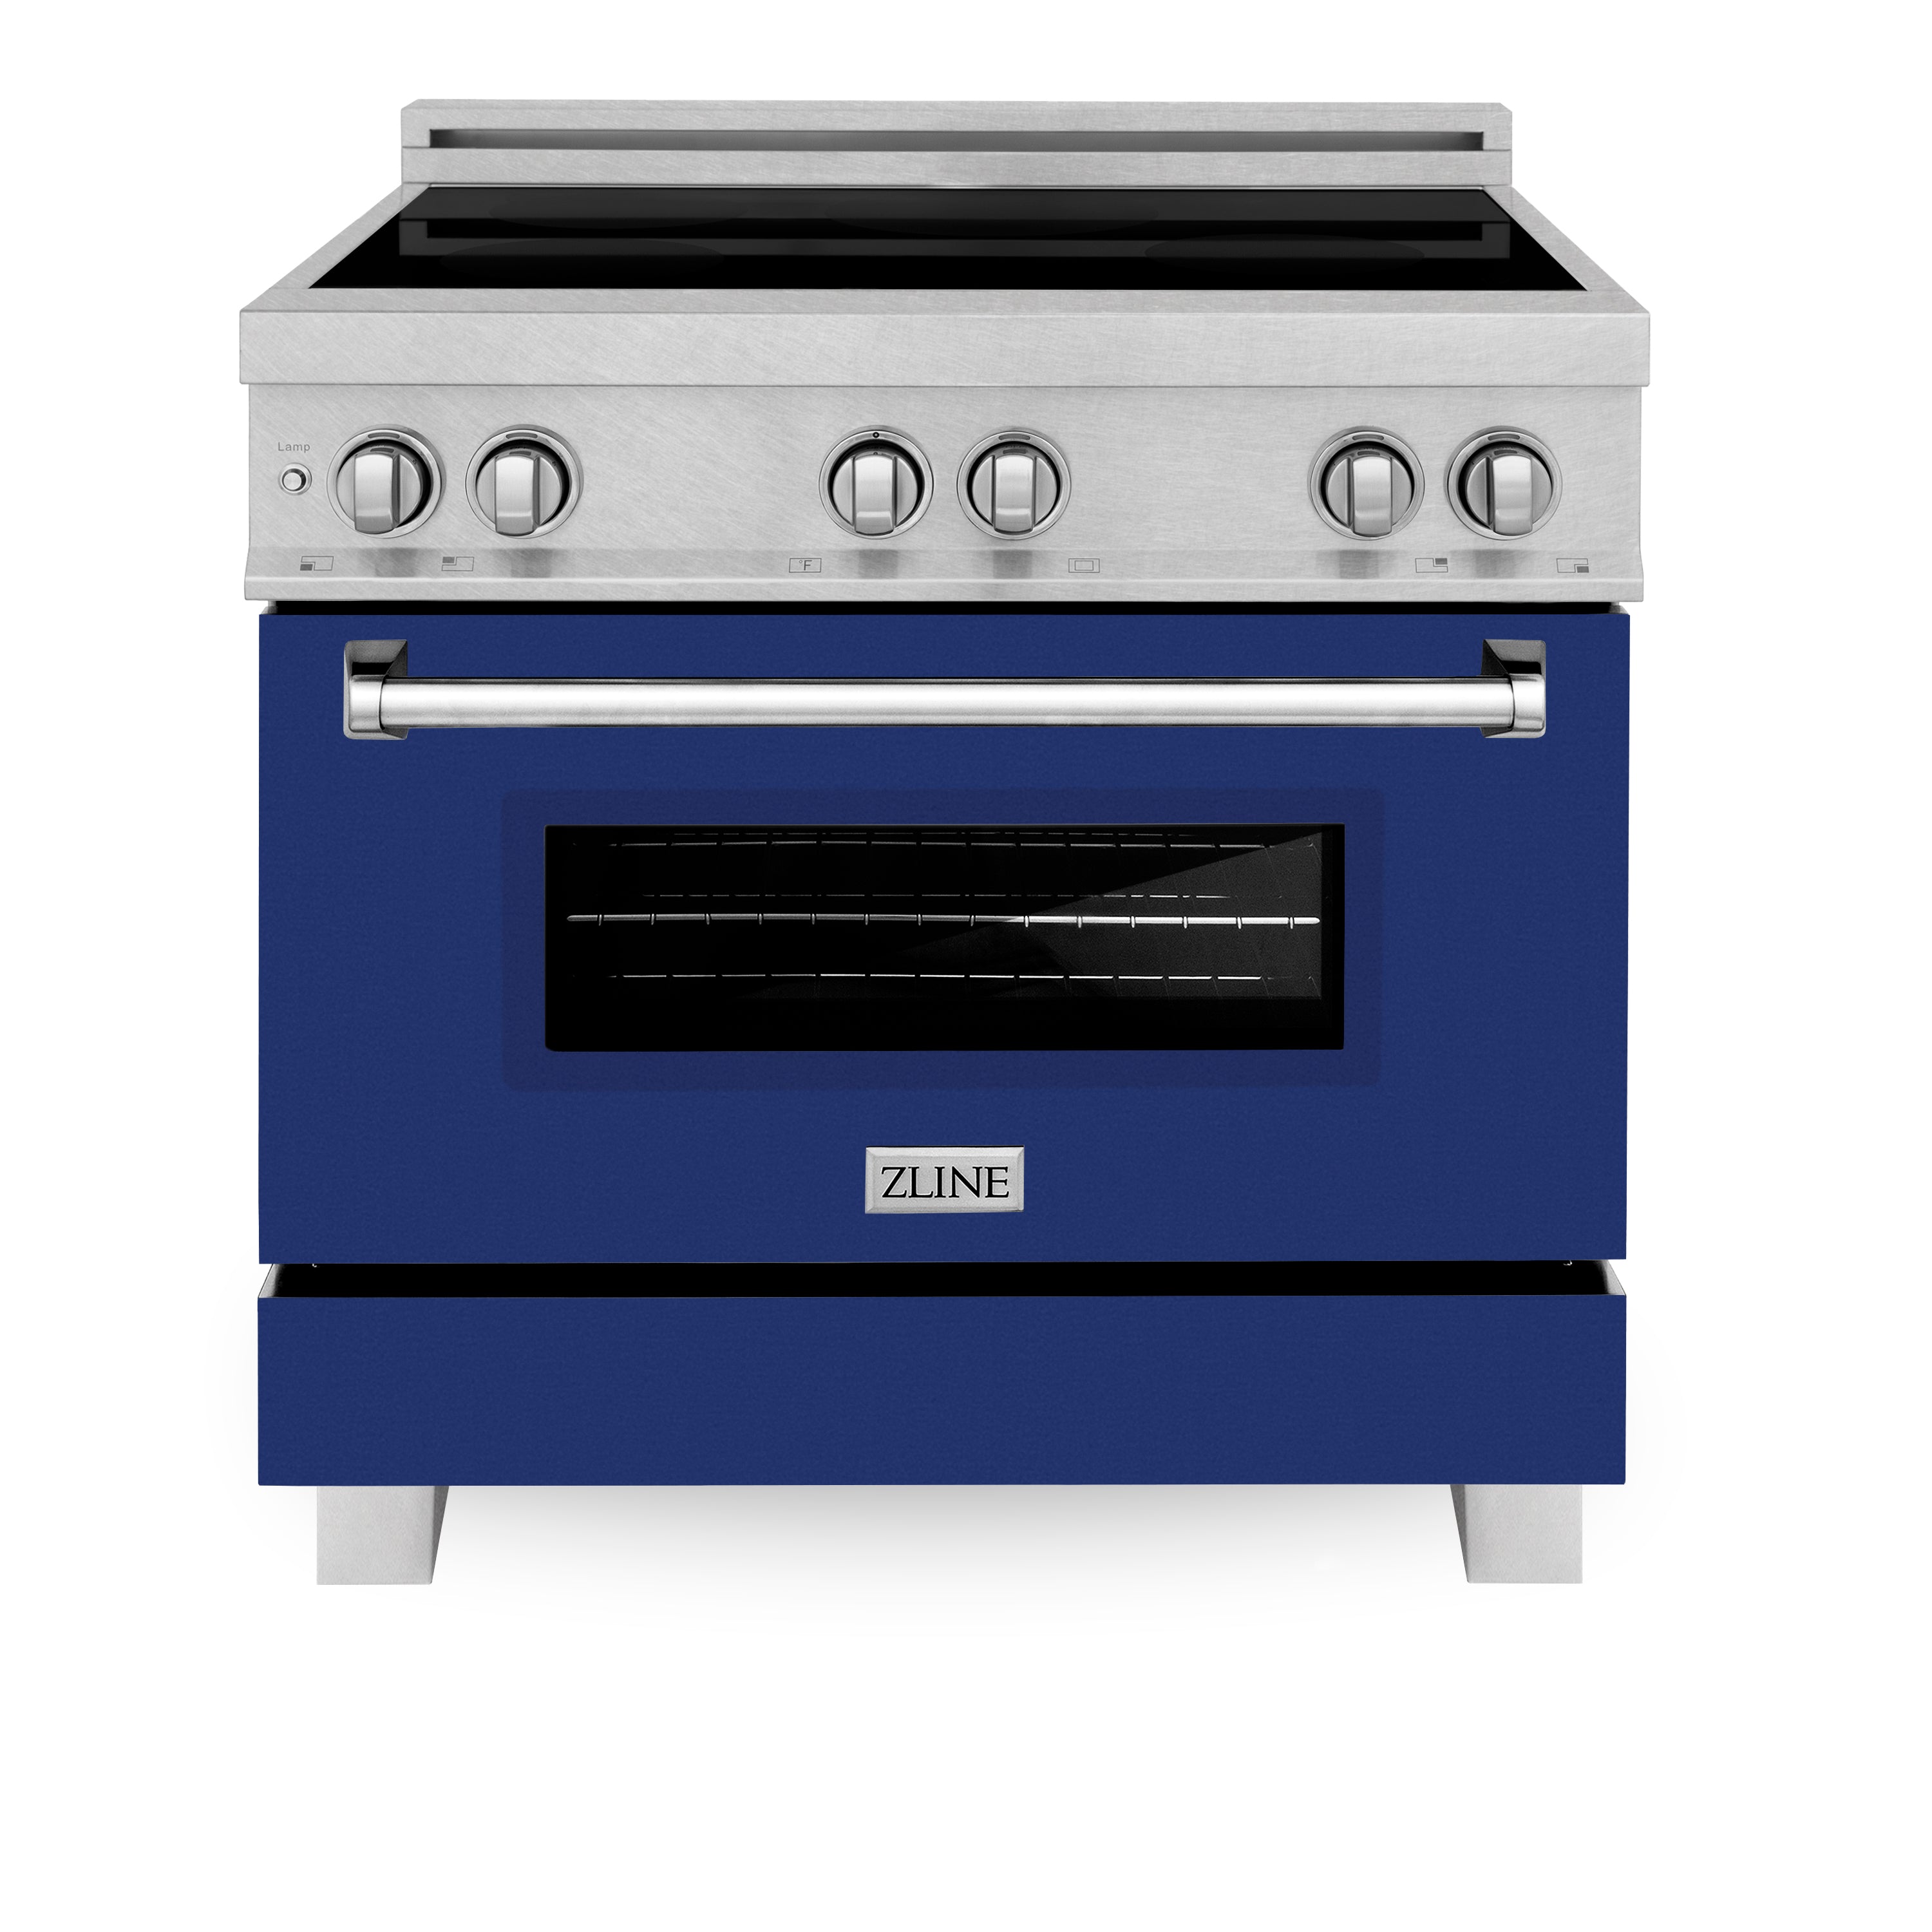 ZLINE 36" 4.6 cu. ft. Induction Range with a 4 Element Stove and Electric Oven in Blue Gloss (RAINDS-BG-36)